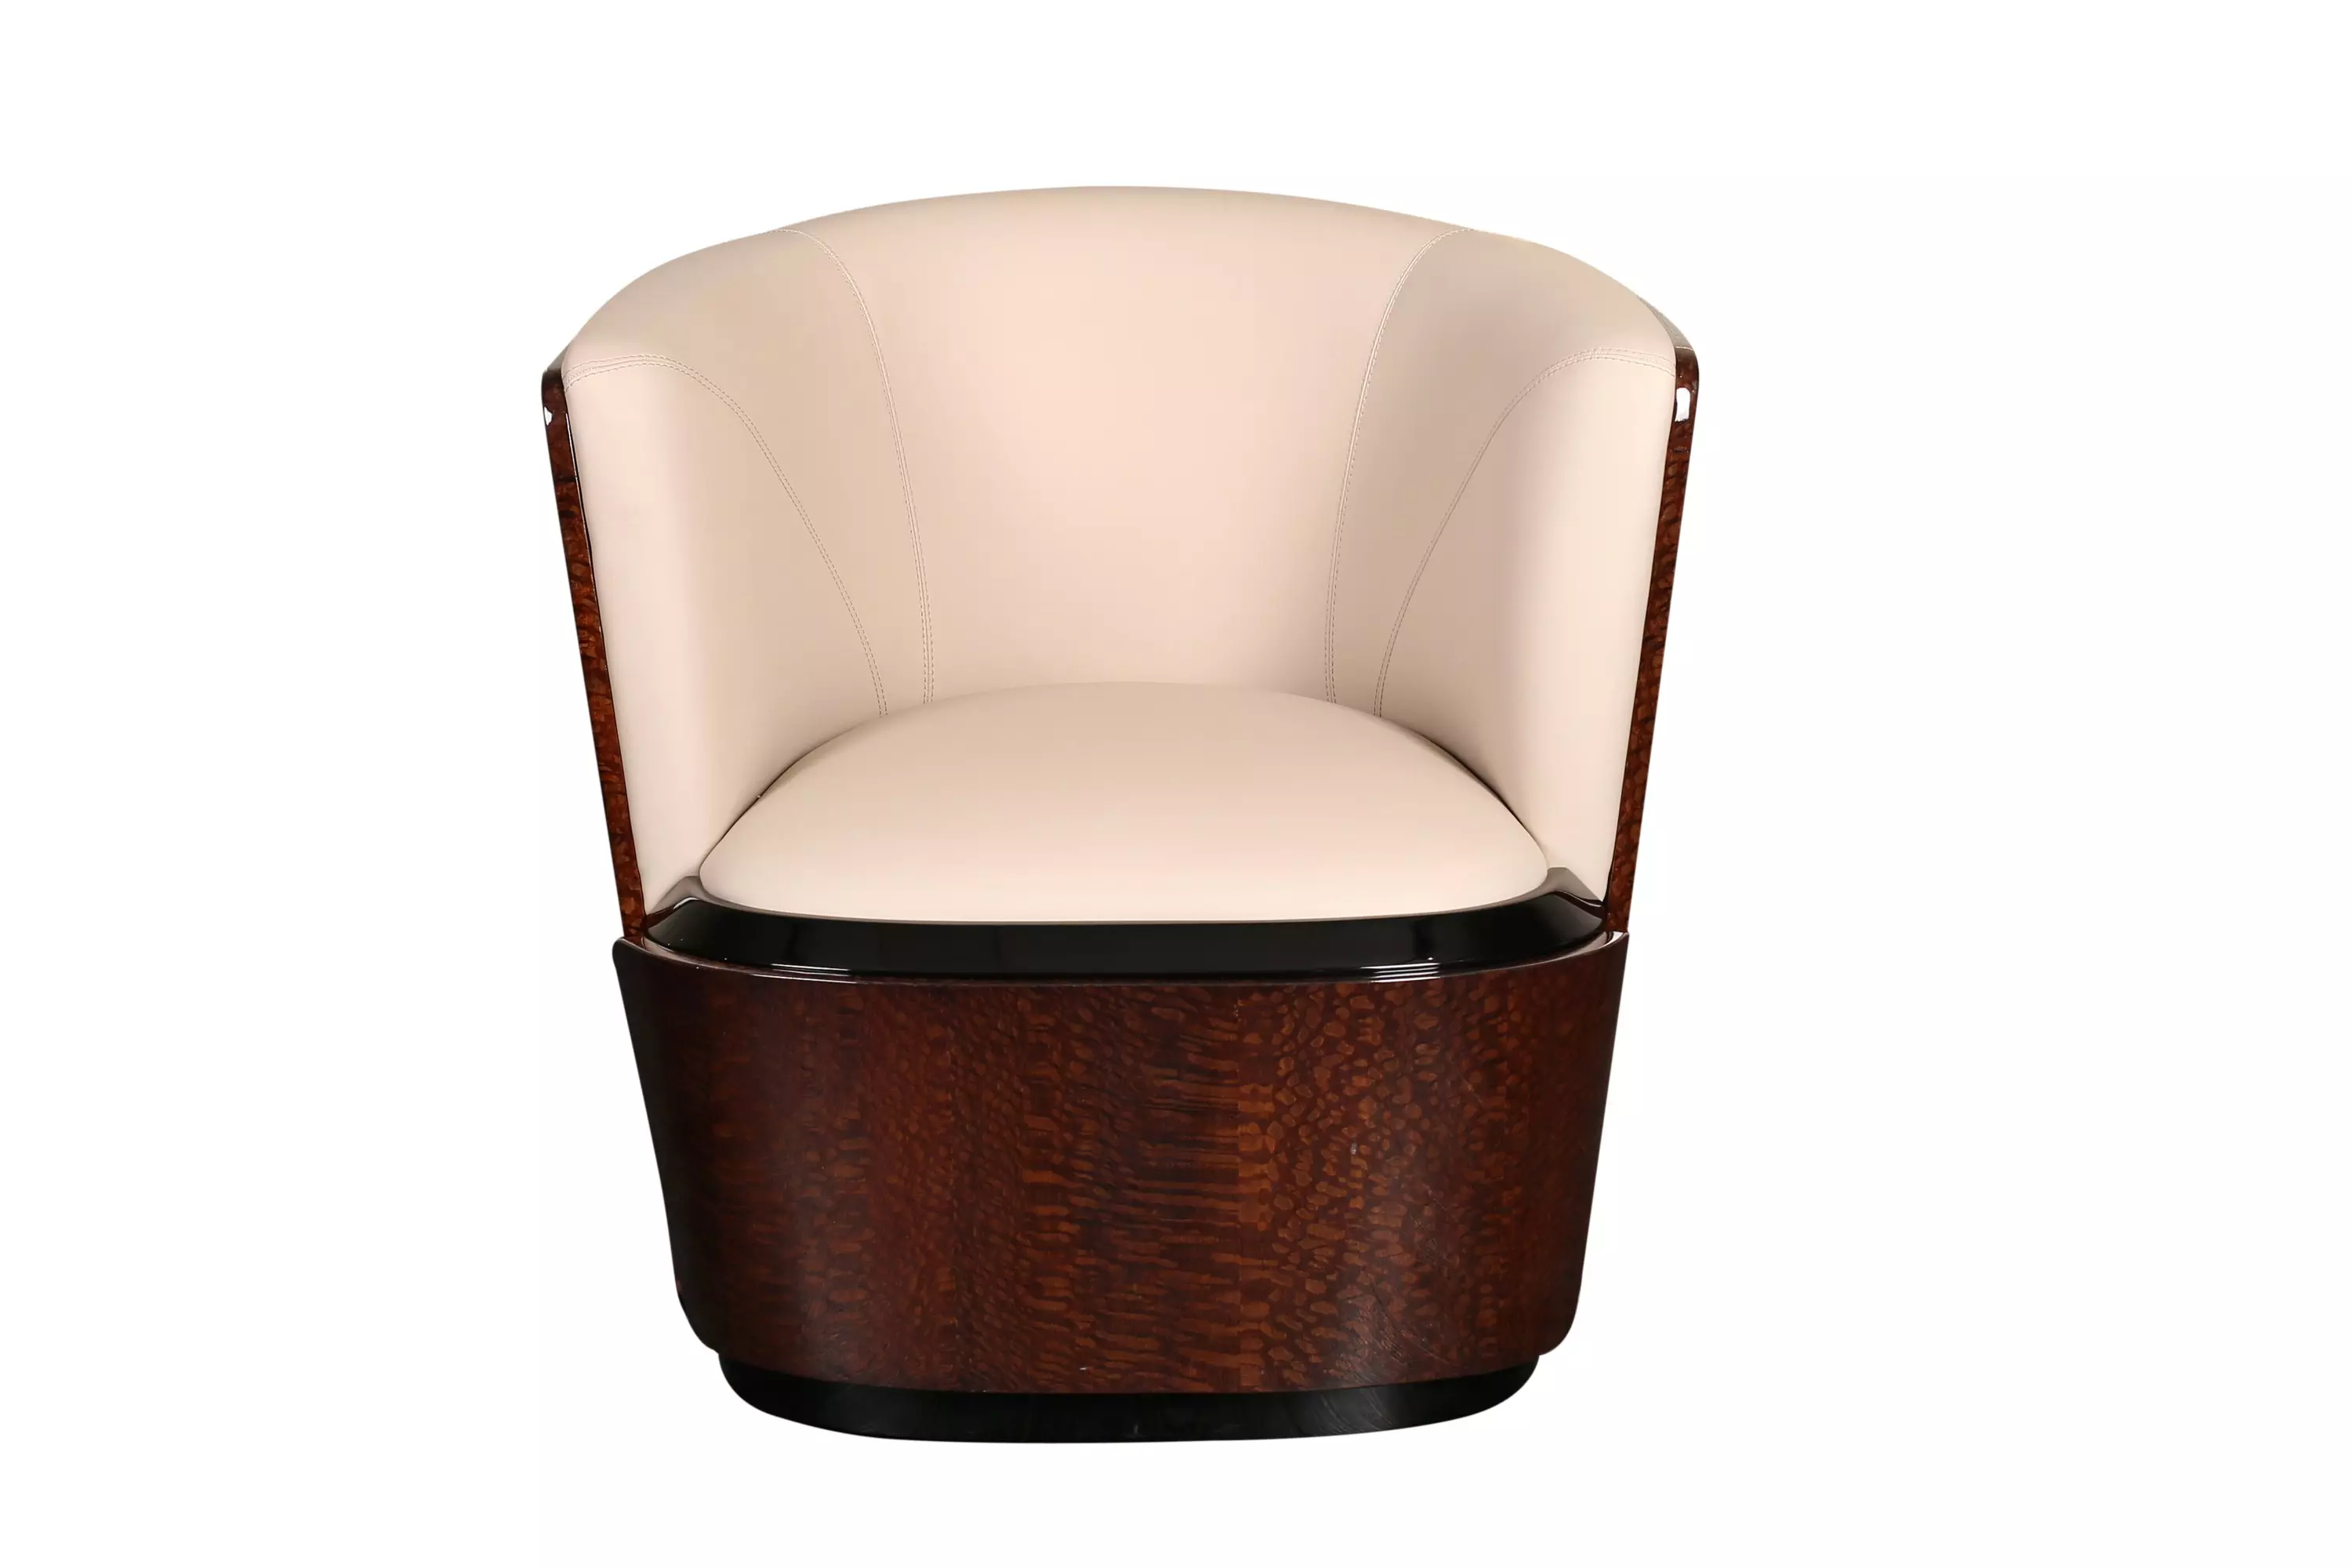 GIO Armchair, which will pamper your home with its indispensable design, is now waiting for its place in your homes.